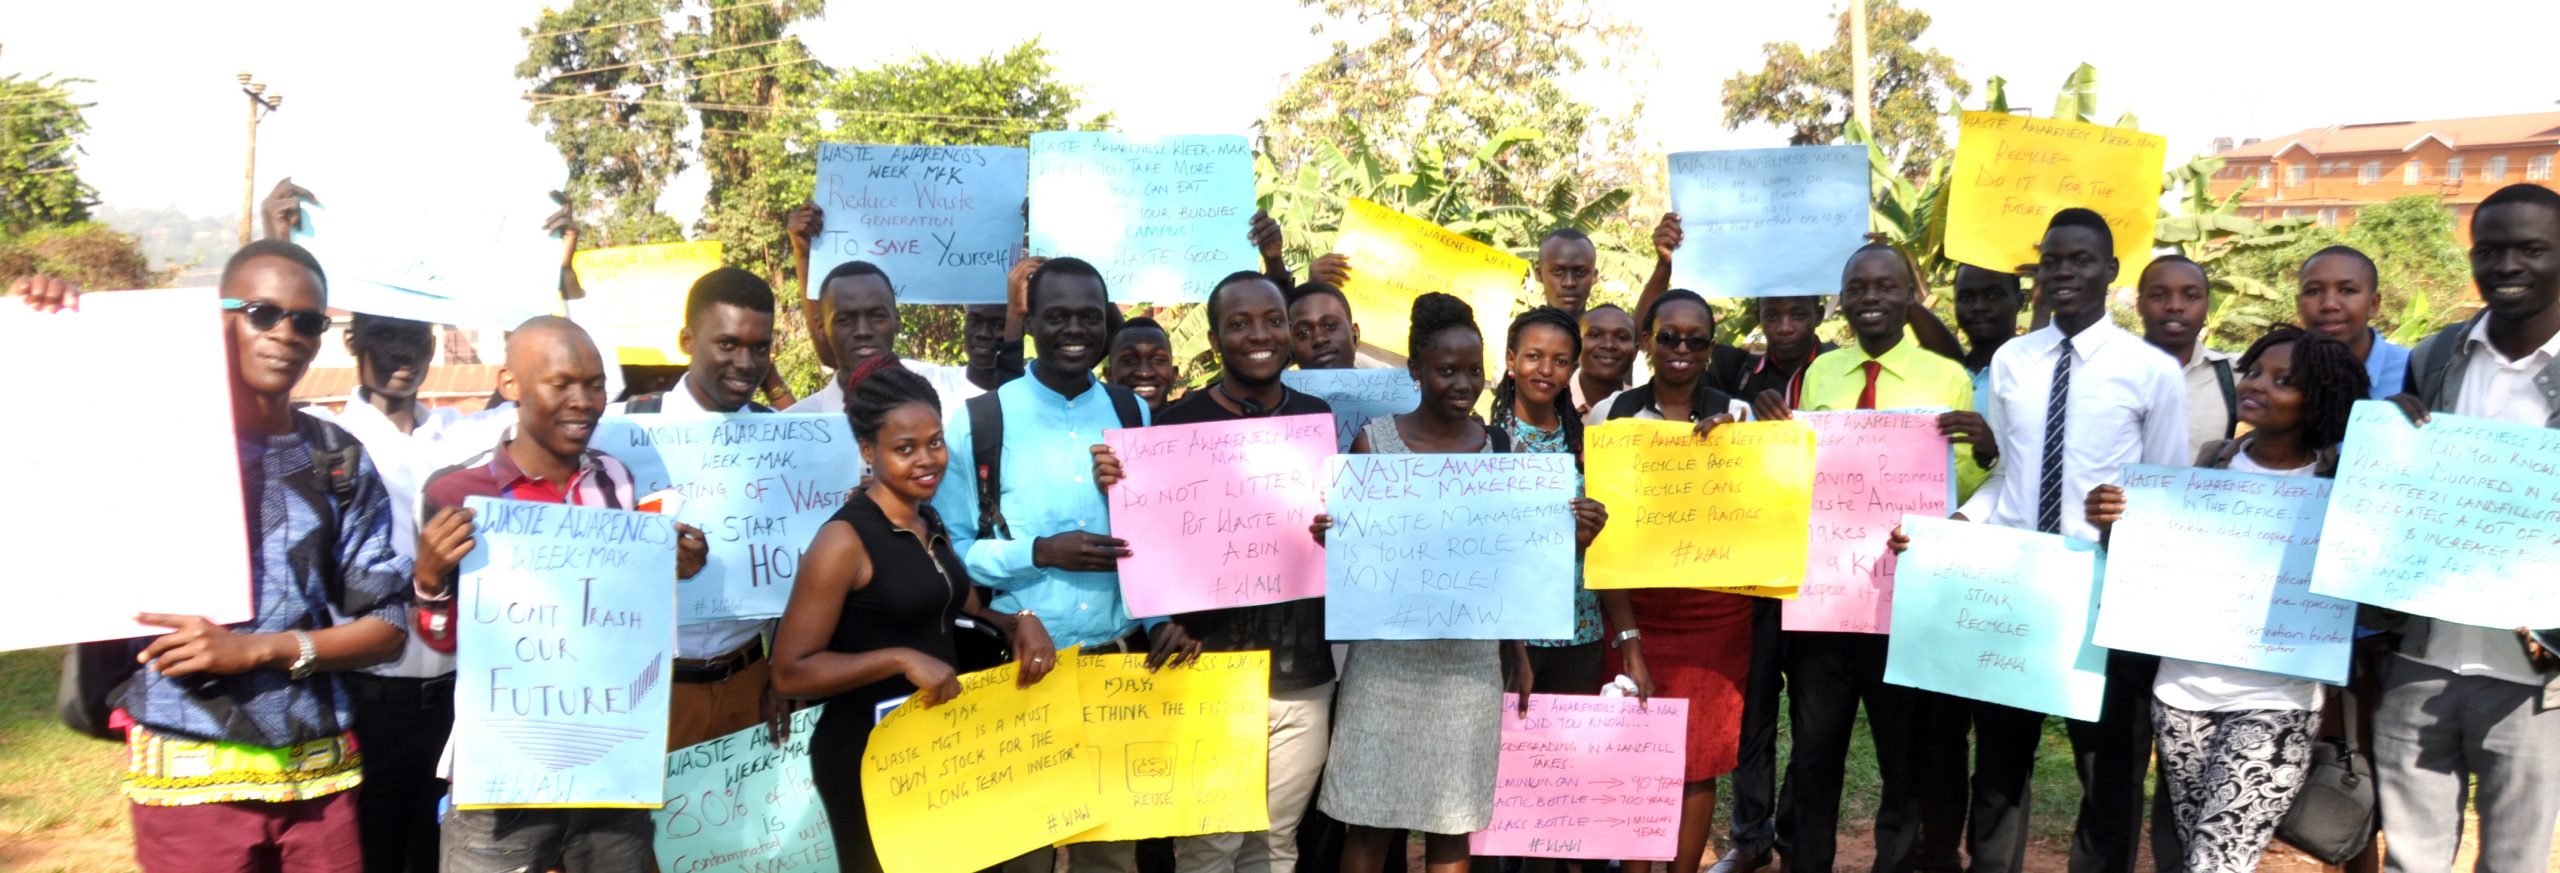 Some of the students taking part in the Makerere University Waste Management Awareness Campaign.